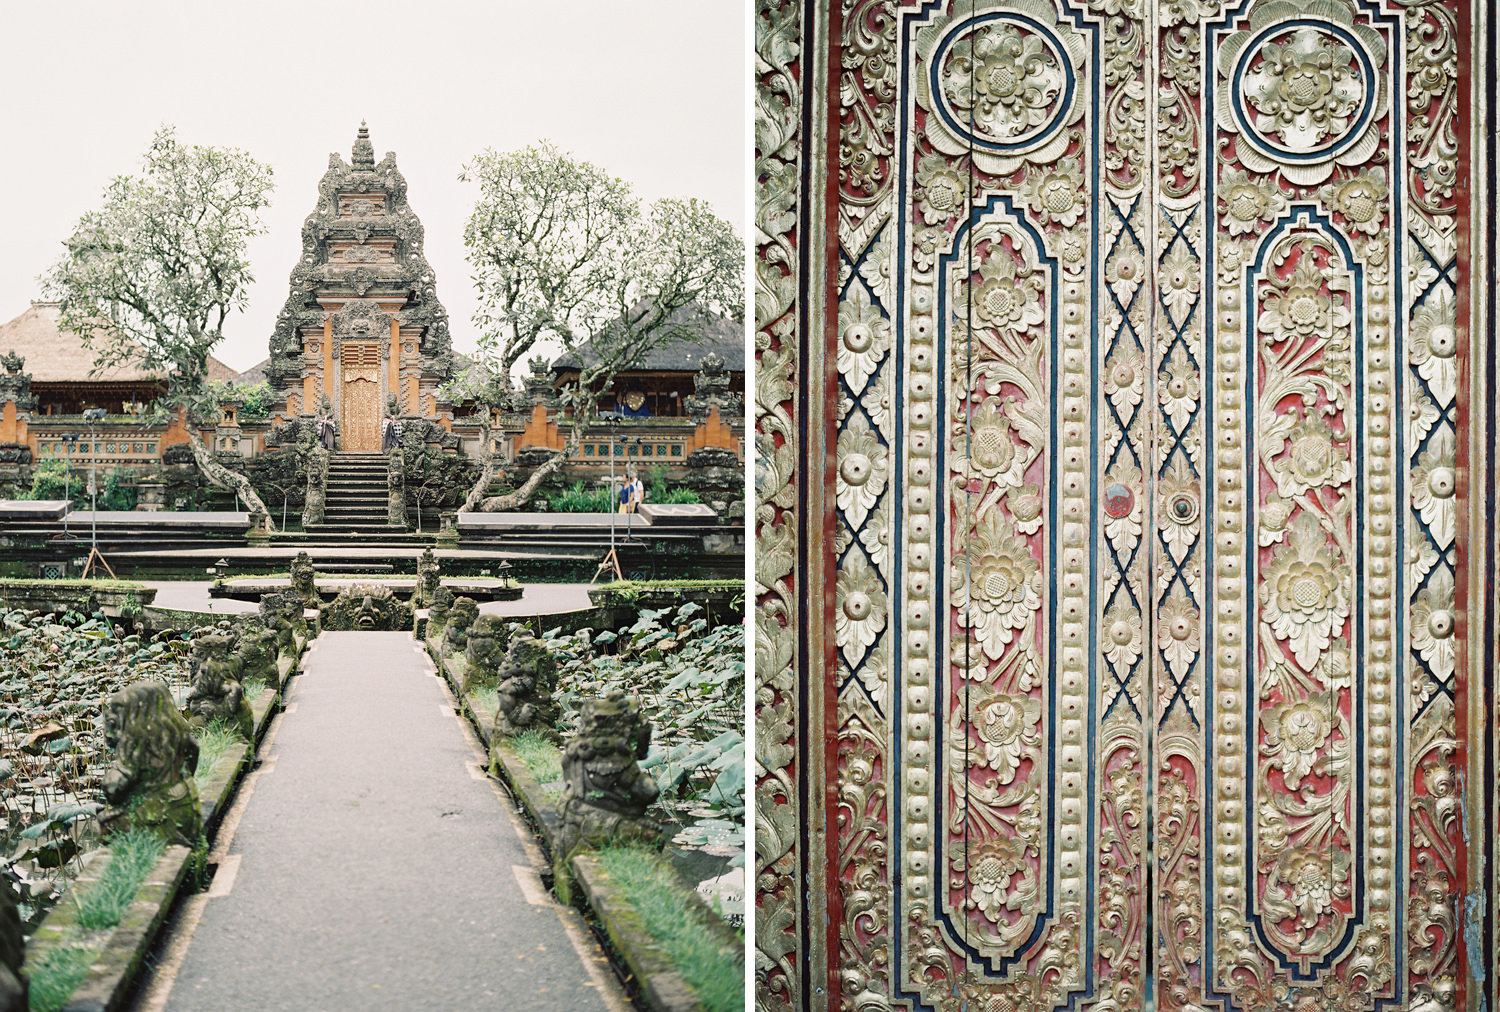 Ubud temples are perfect for wedding photography